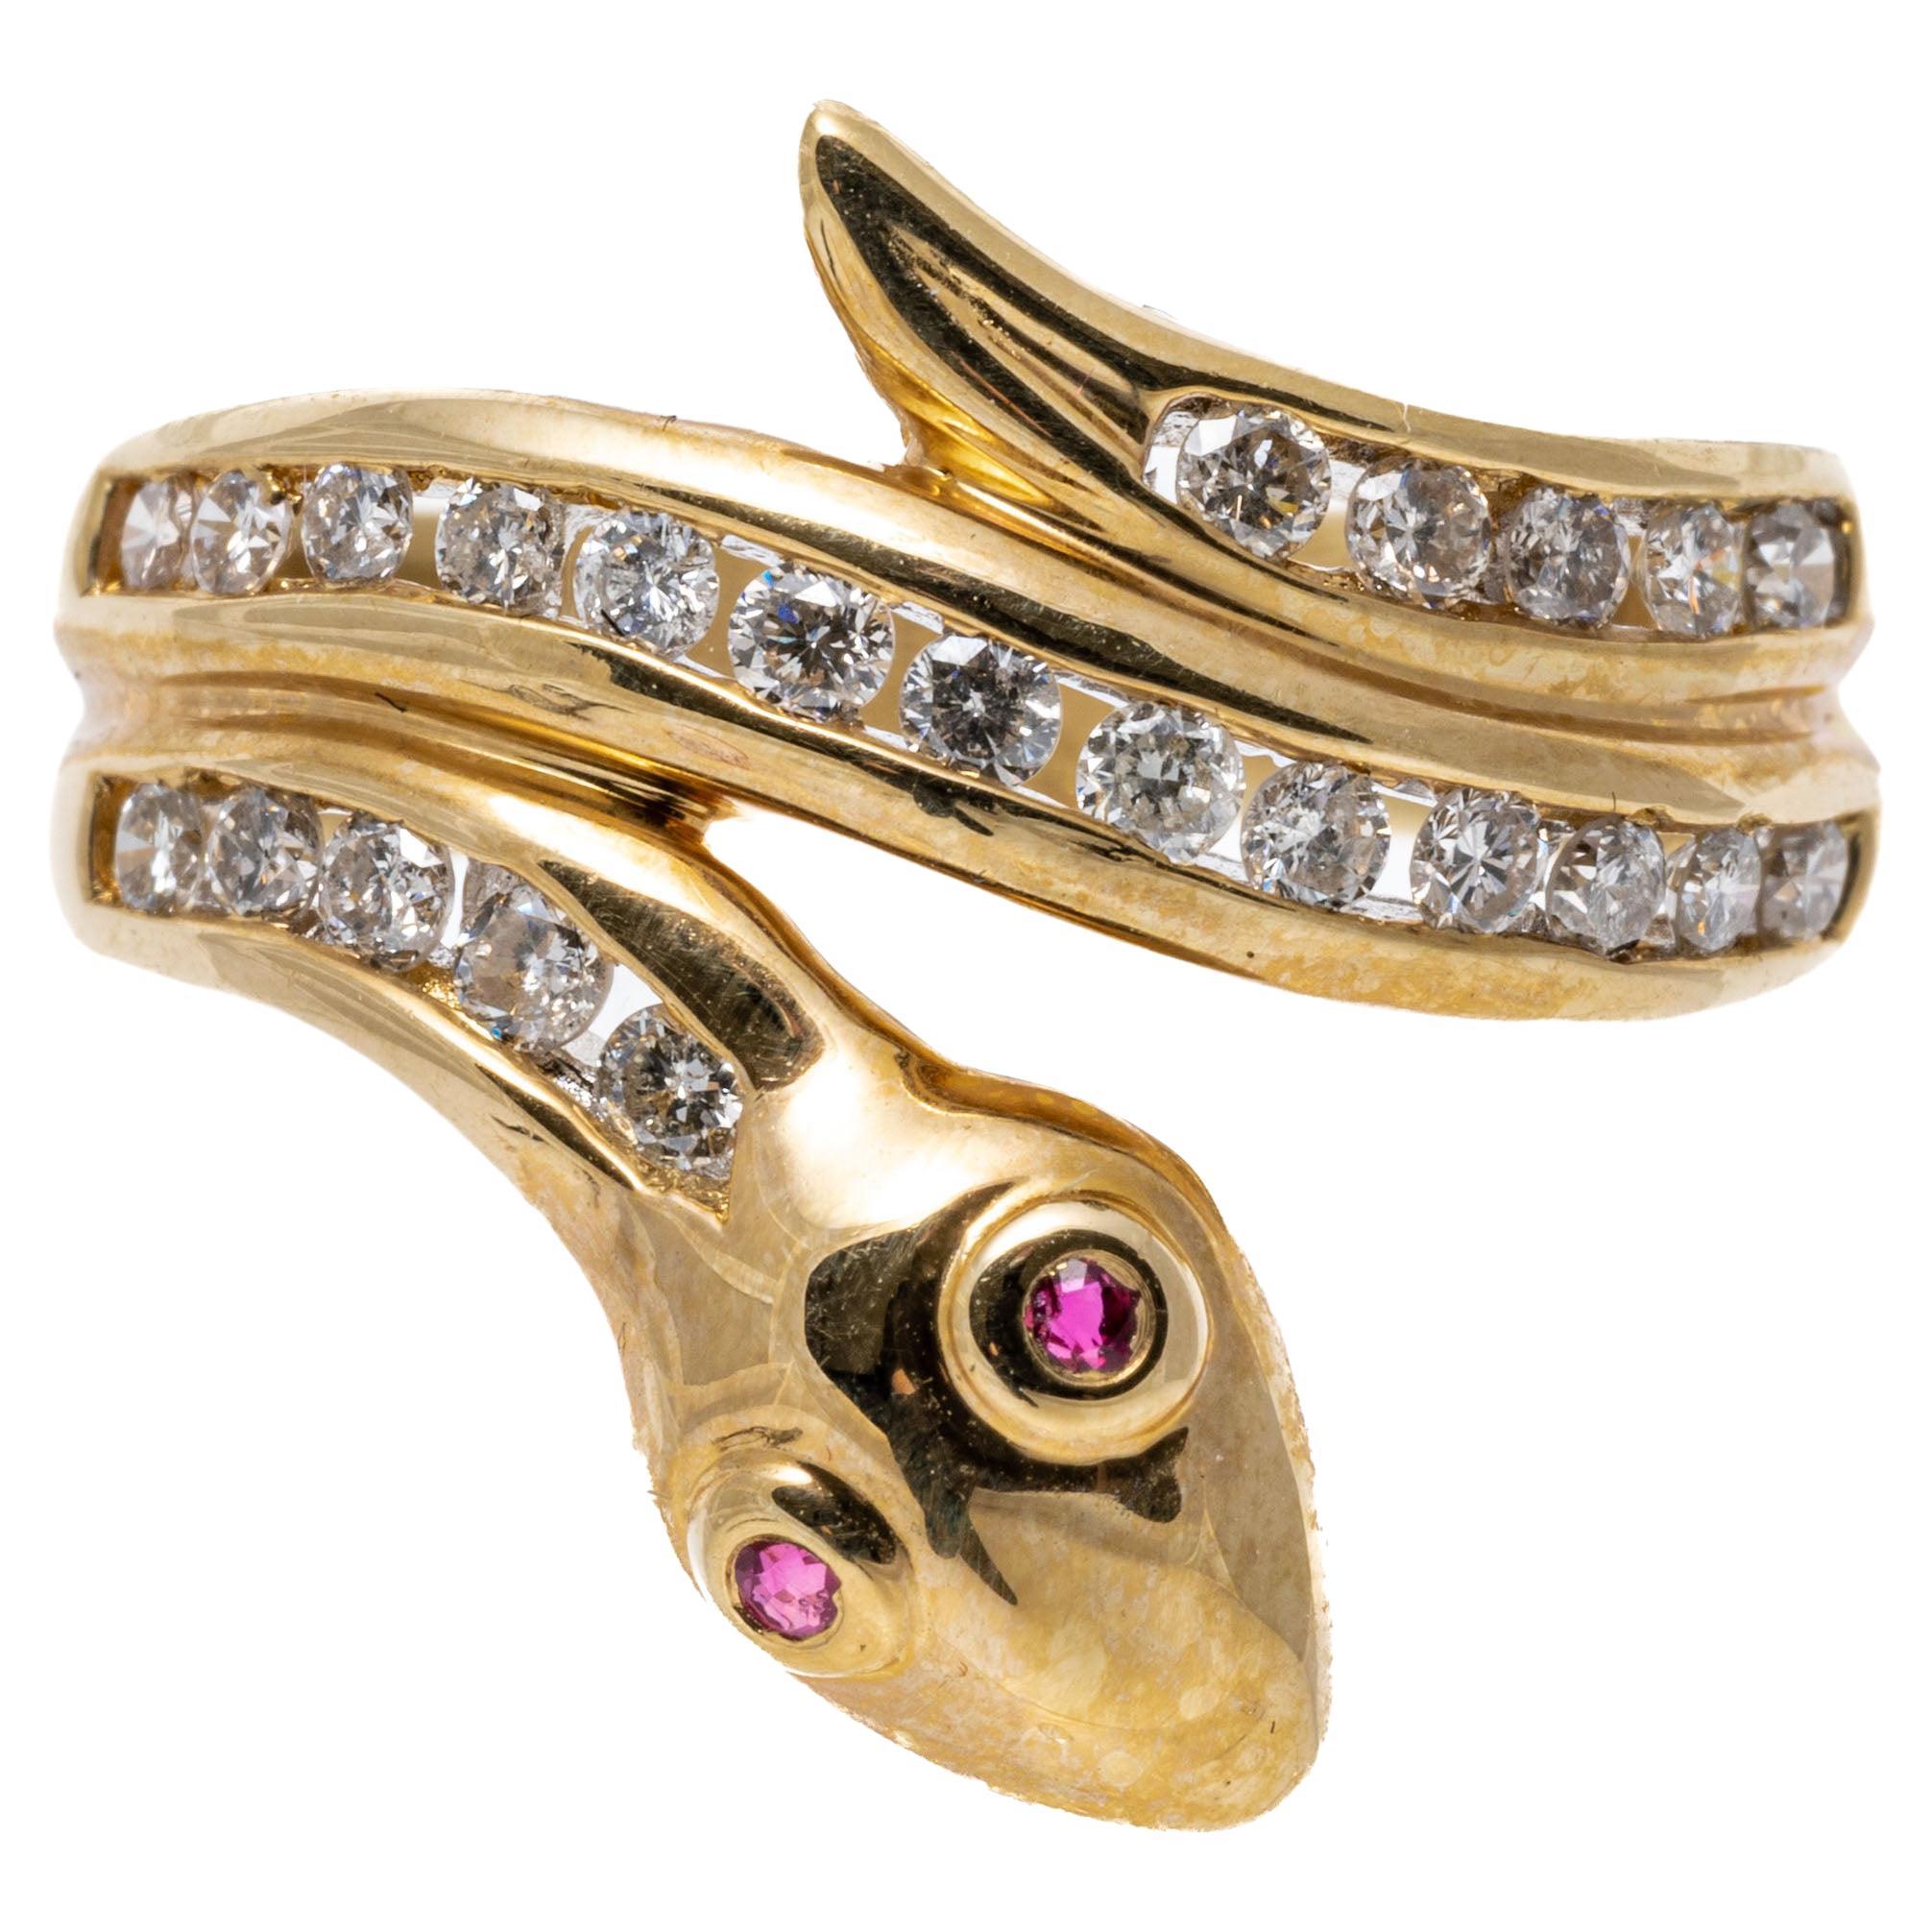 14k Yellow Gold Channel Set Diamond Coiled Snake Ring